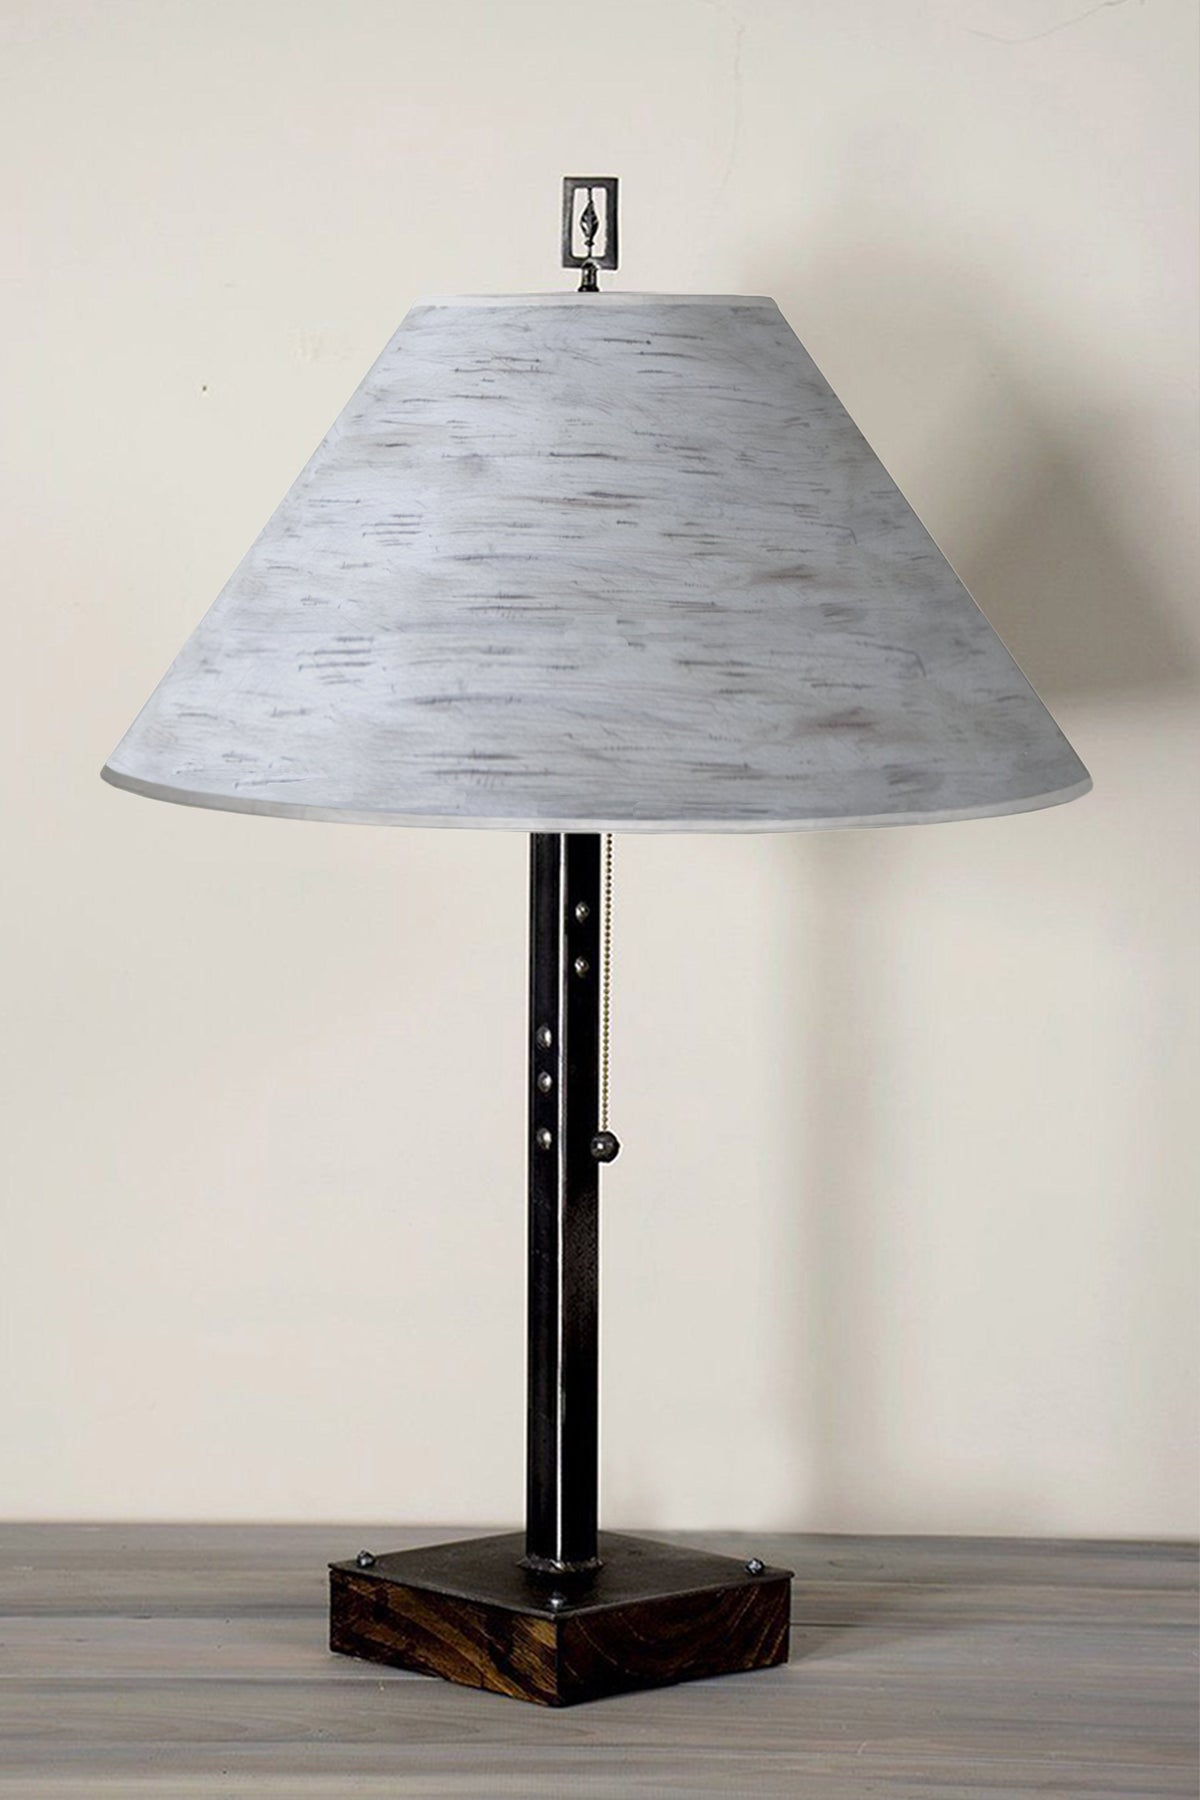 Janna Ugone &amp; Co Table Lamps Steel Table Lamp on Wood with Large Conical Shade in Simply Birch